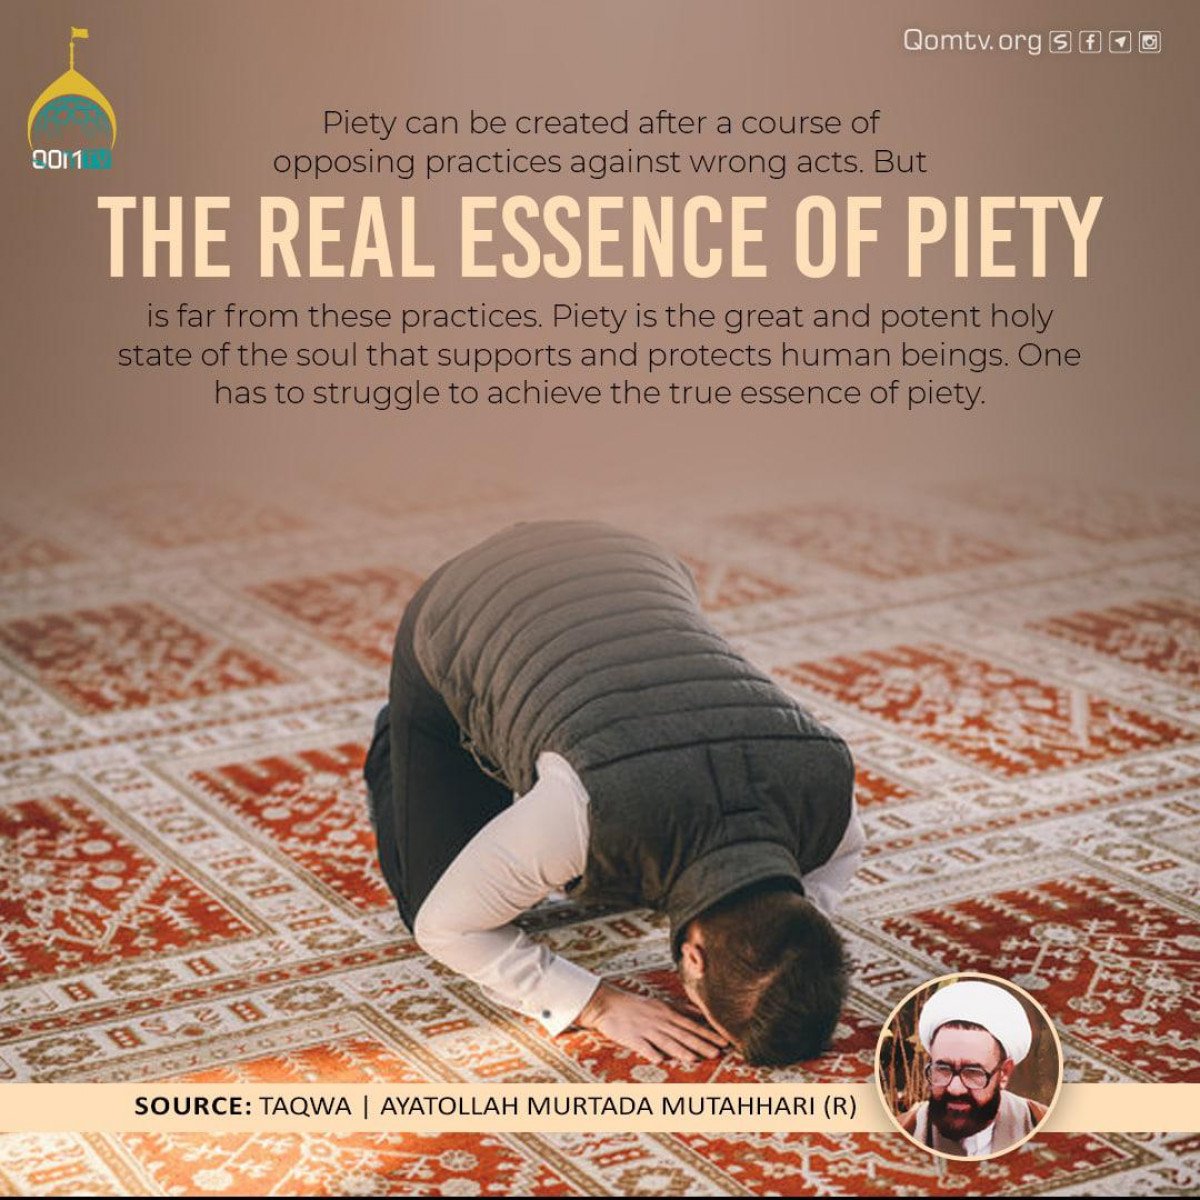 Piety can be created after a course of opposing practices against wrong acts